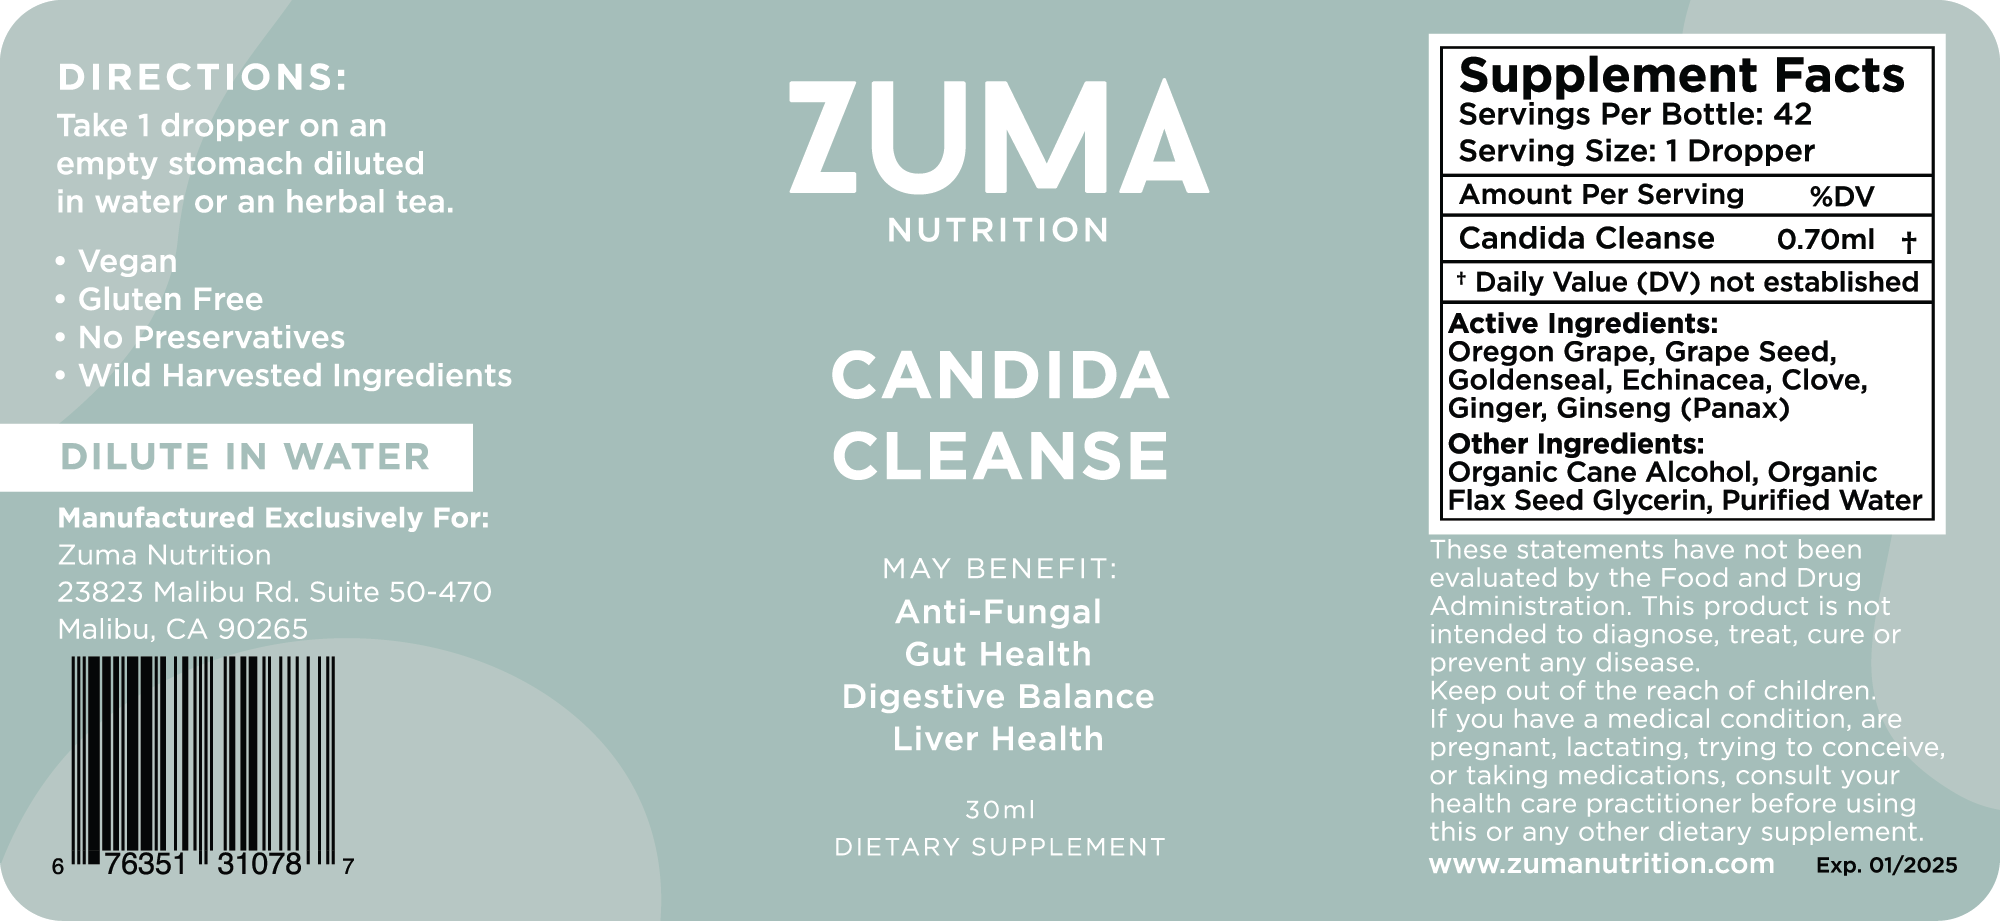 Candida Cleanse Tonic